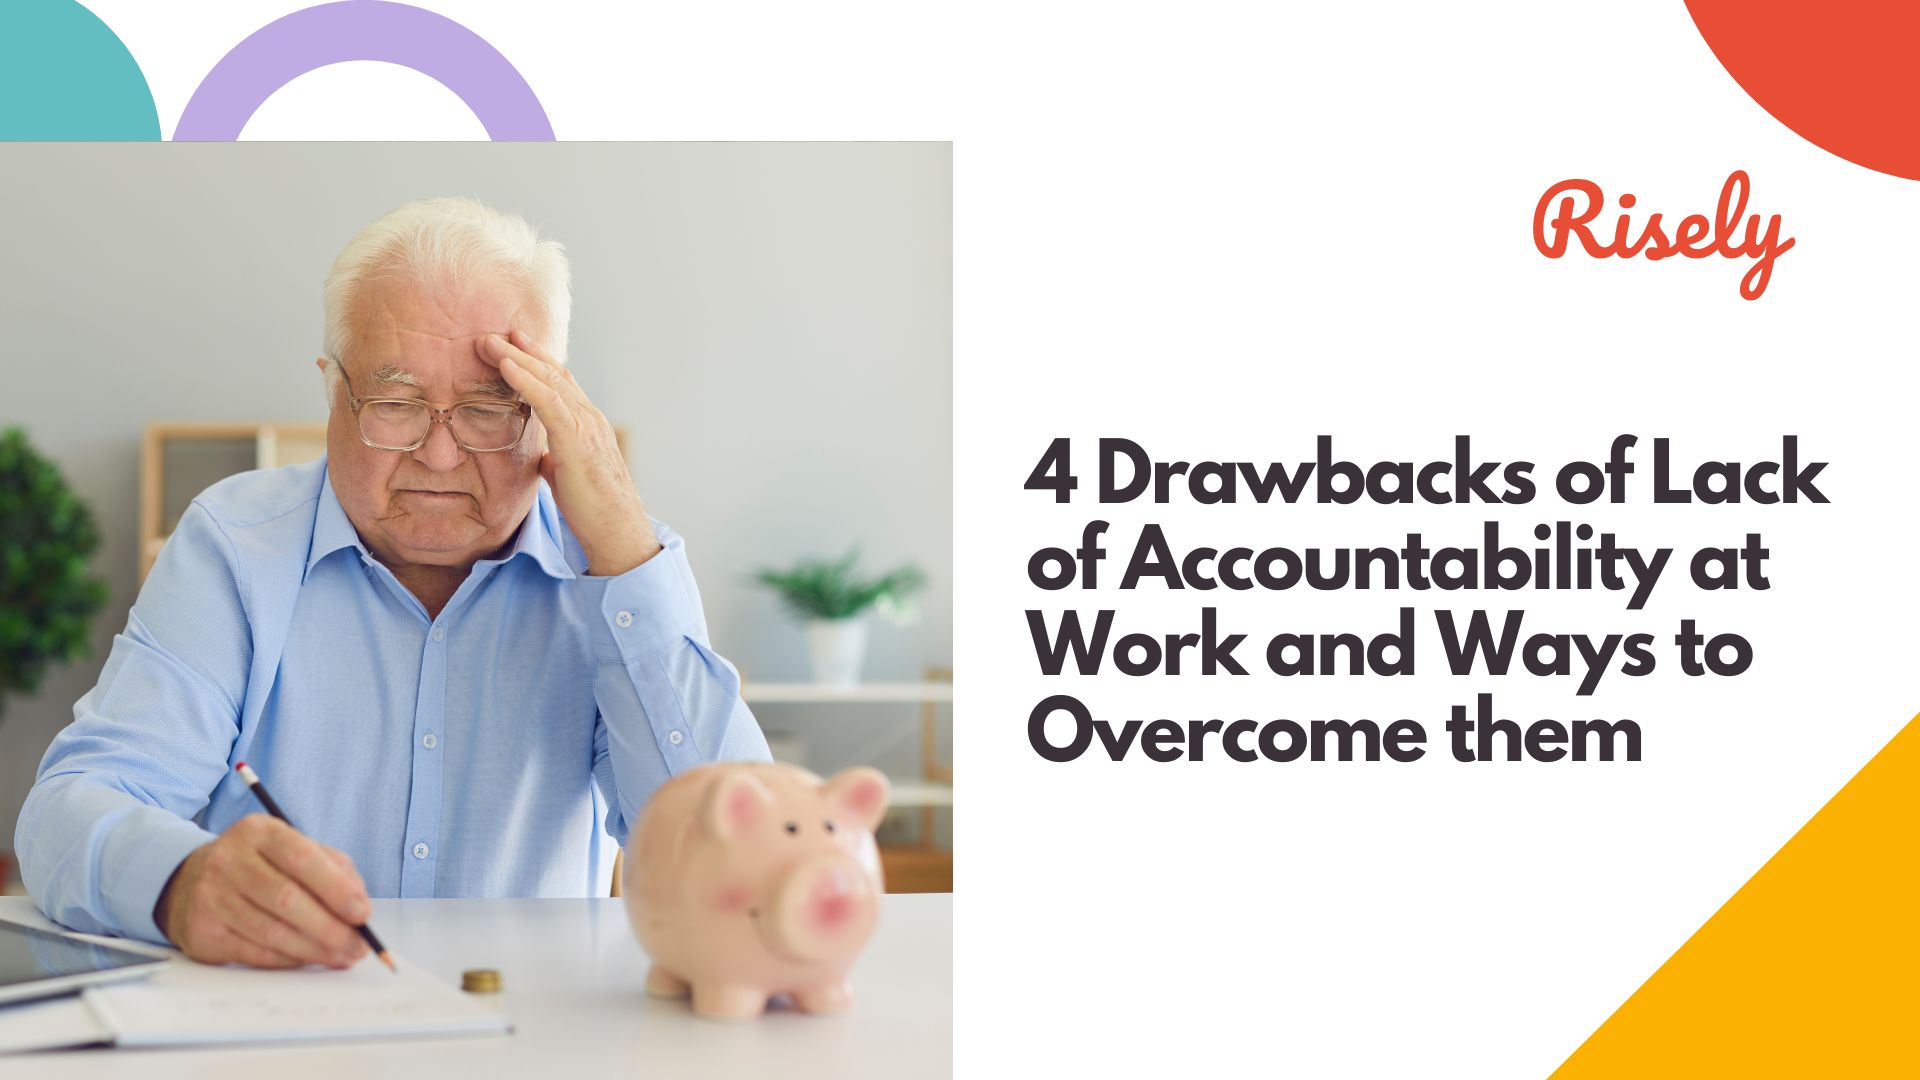 4 Drawbacks of Lack of Accountability at Work and Ways to Overcome them